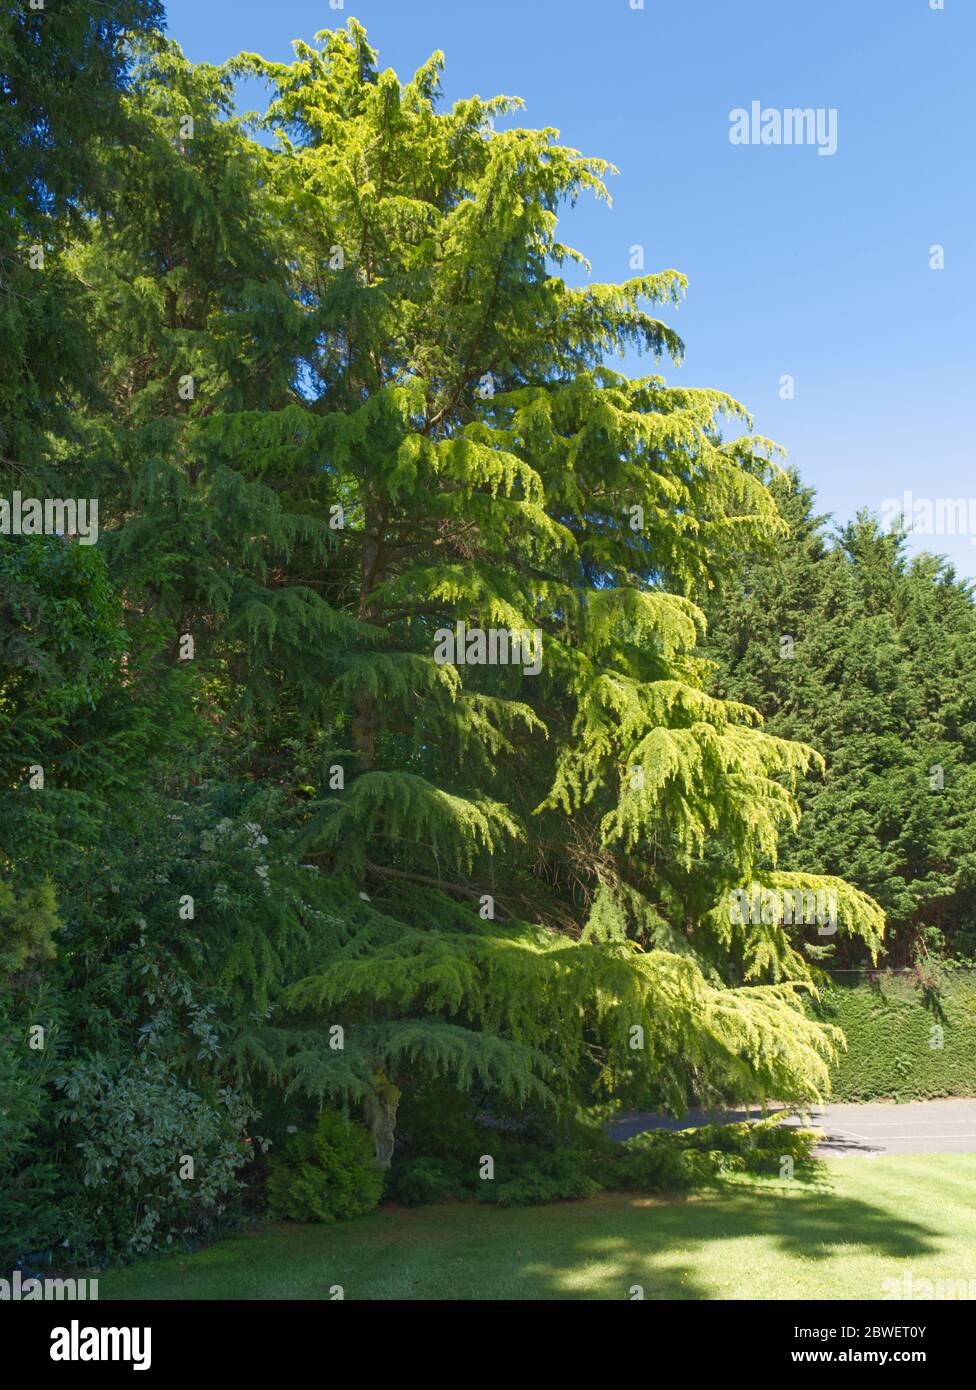 Spectacular Common Hemlock Spruce dominating the grounds of wonderful parkland on a glorious early summer day in England. More easing of lockdown Stock Photo